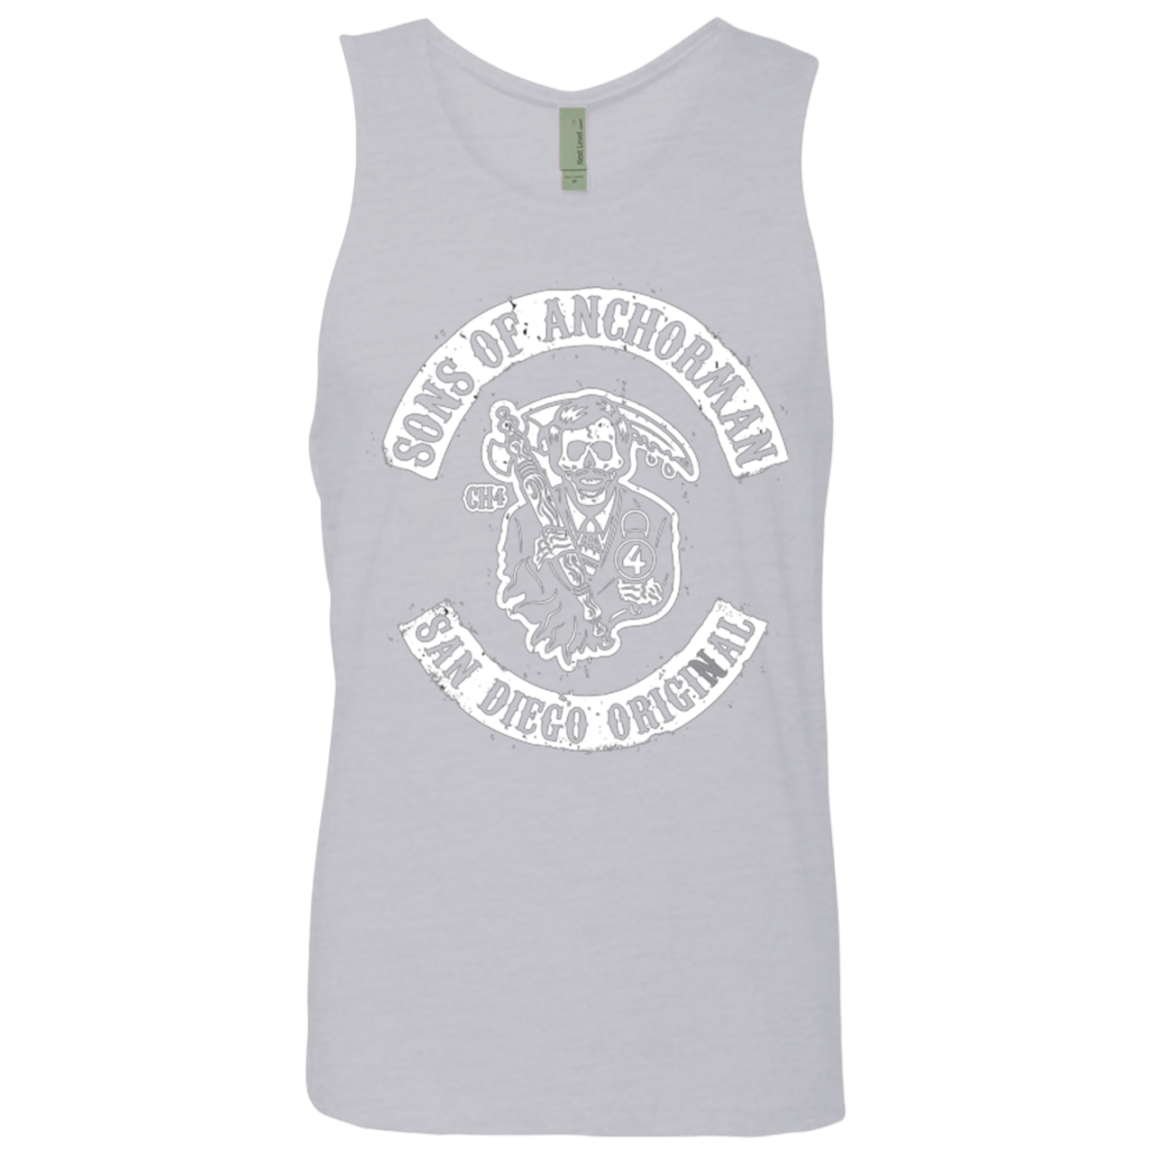 T-Shirts Heather Grey / Small Sons of Anchorman Men's Premium Tank Top